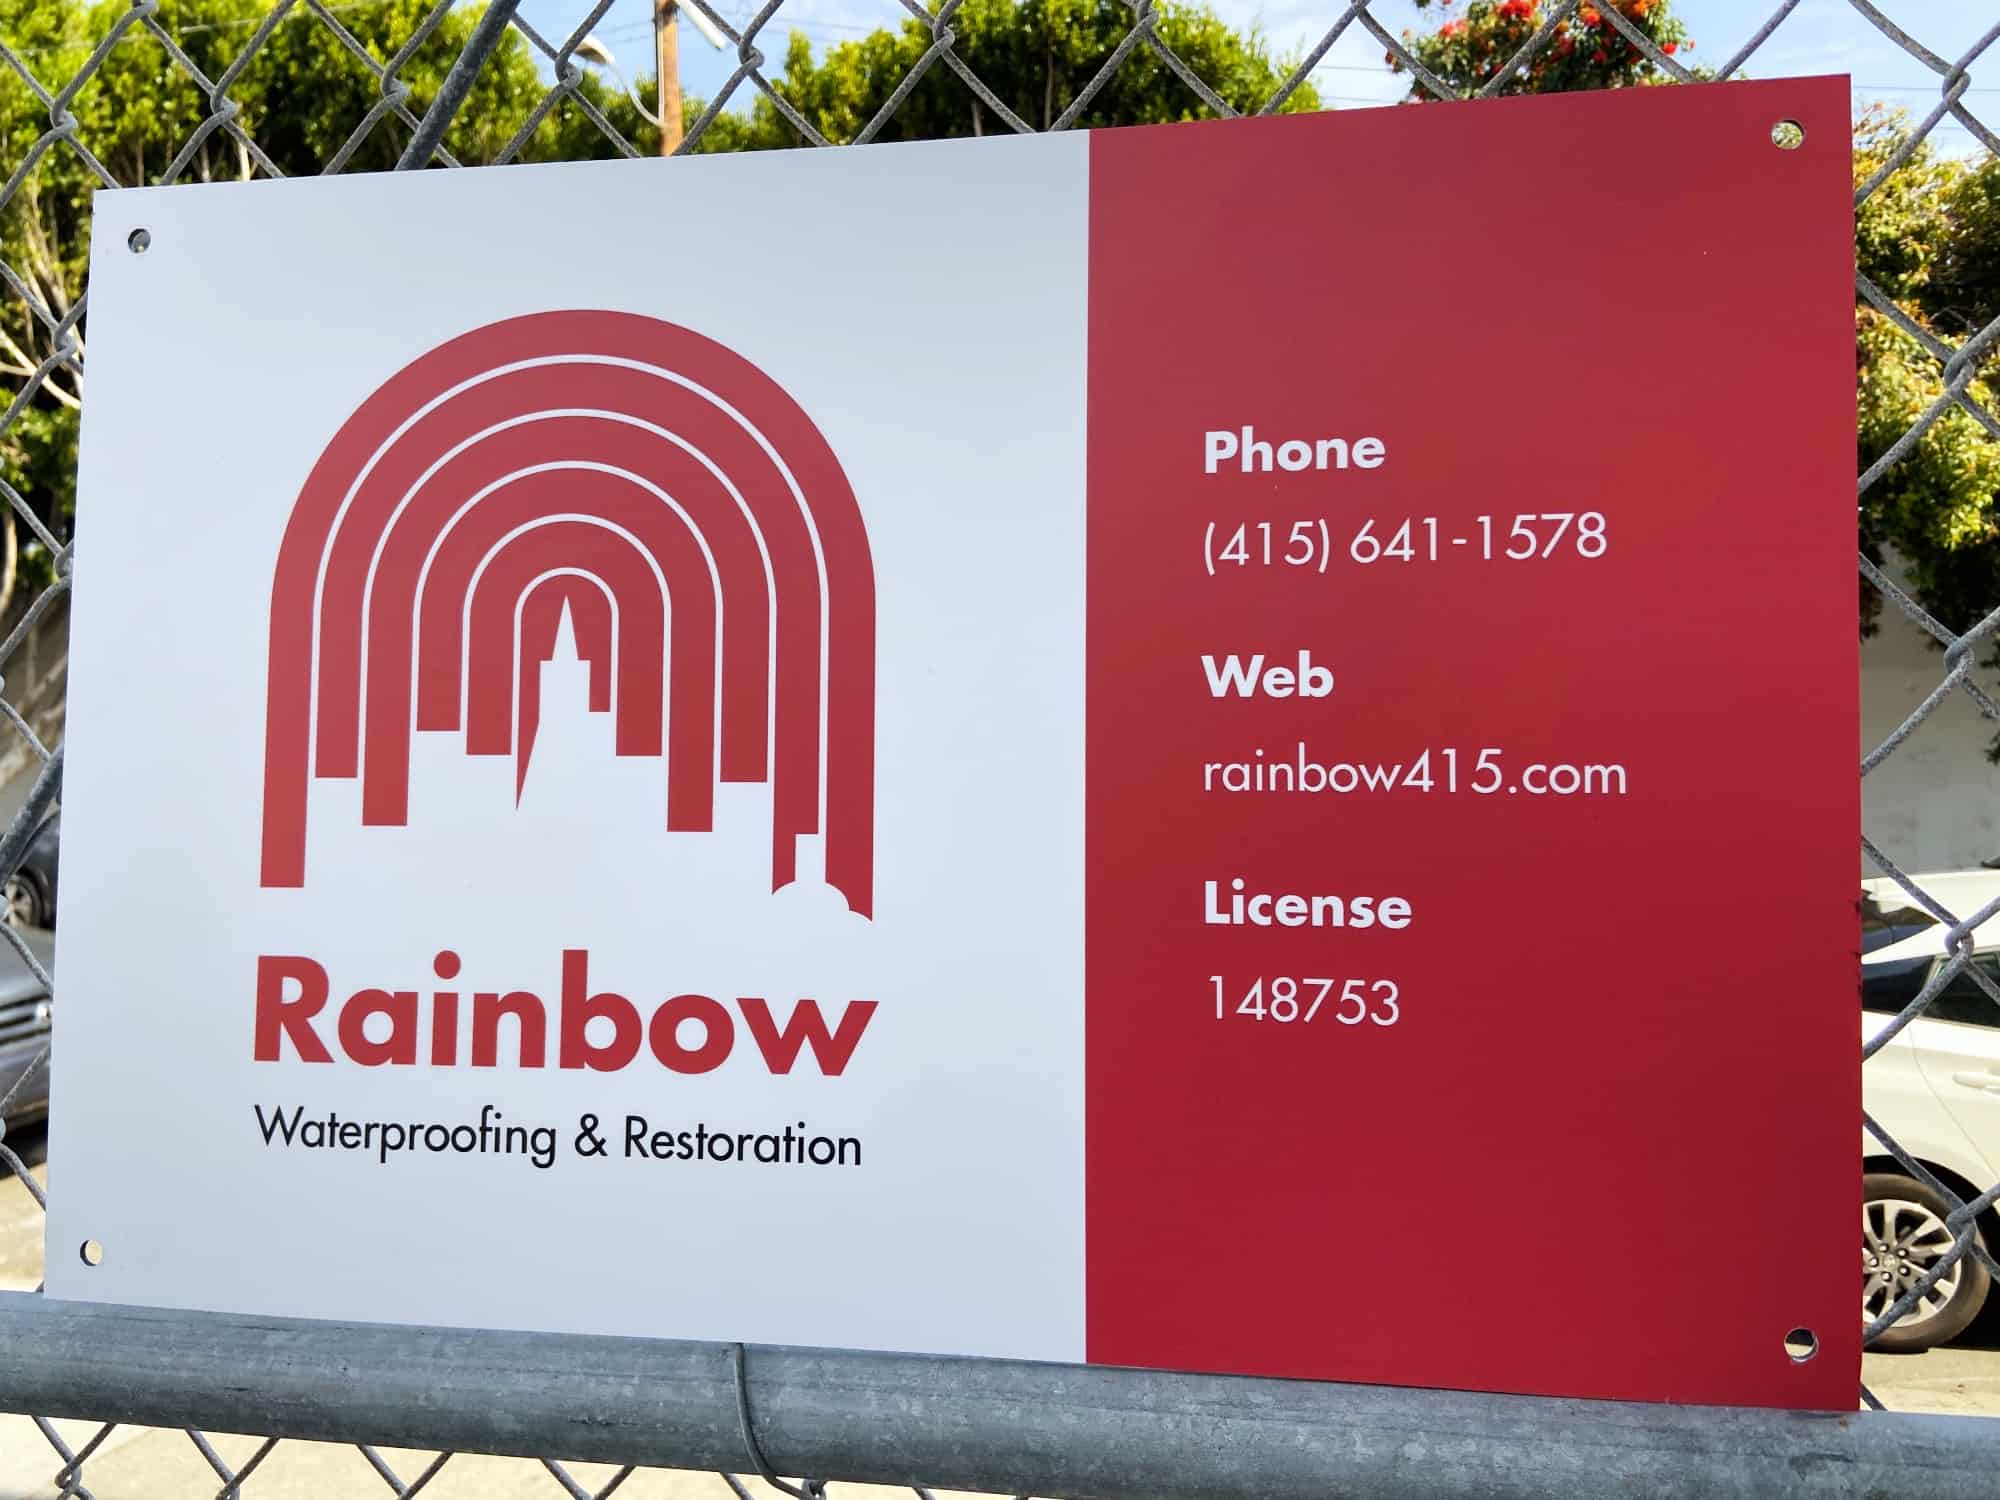 Rainbow offers high-quality building restoration services throughout the Bay Area.